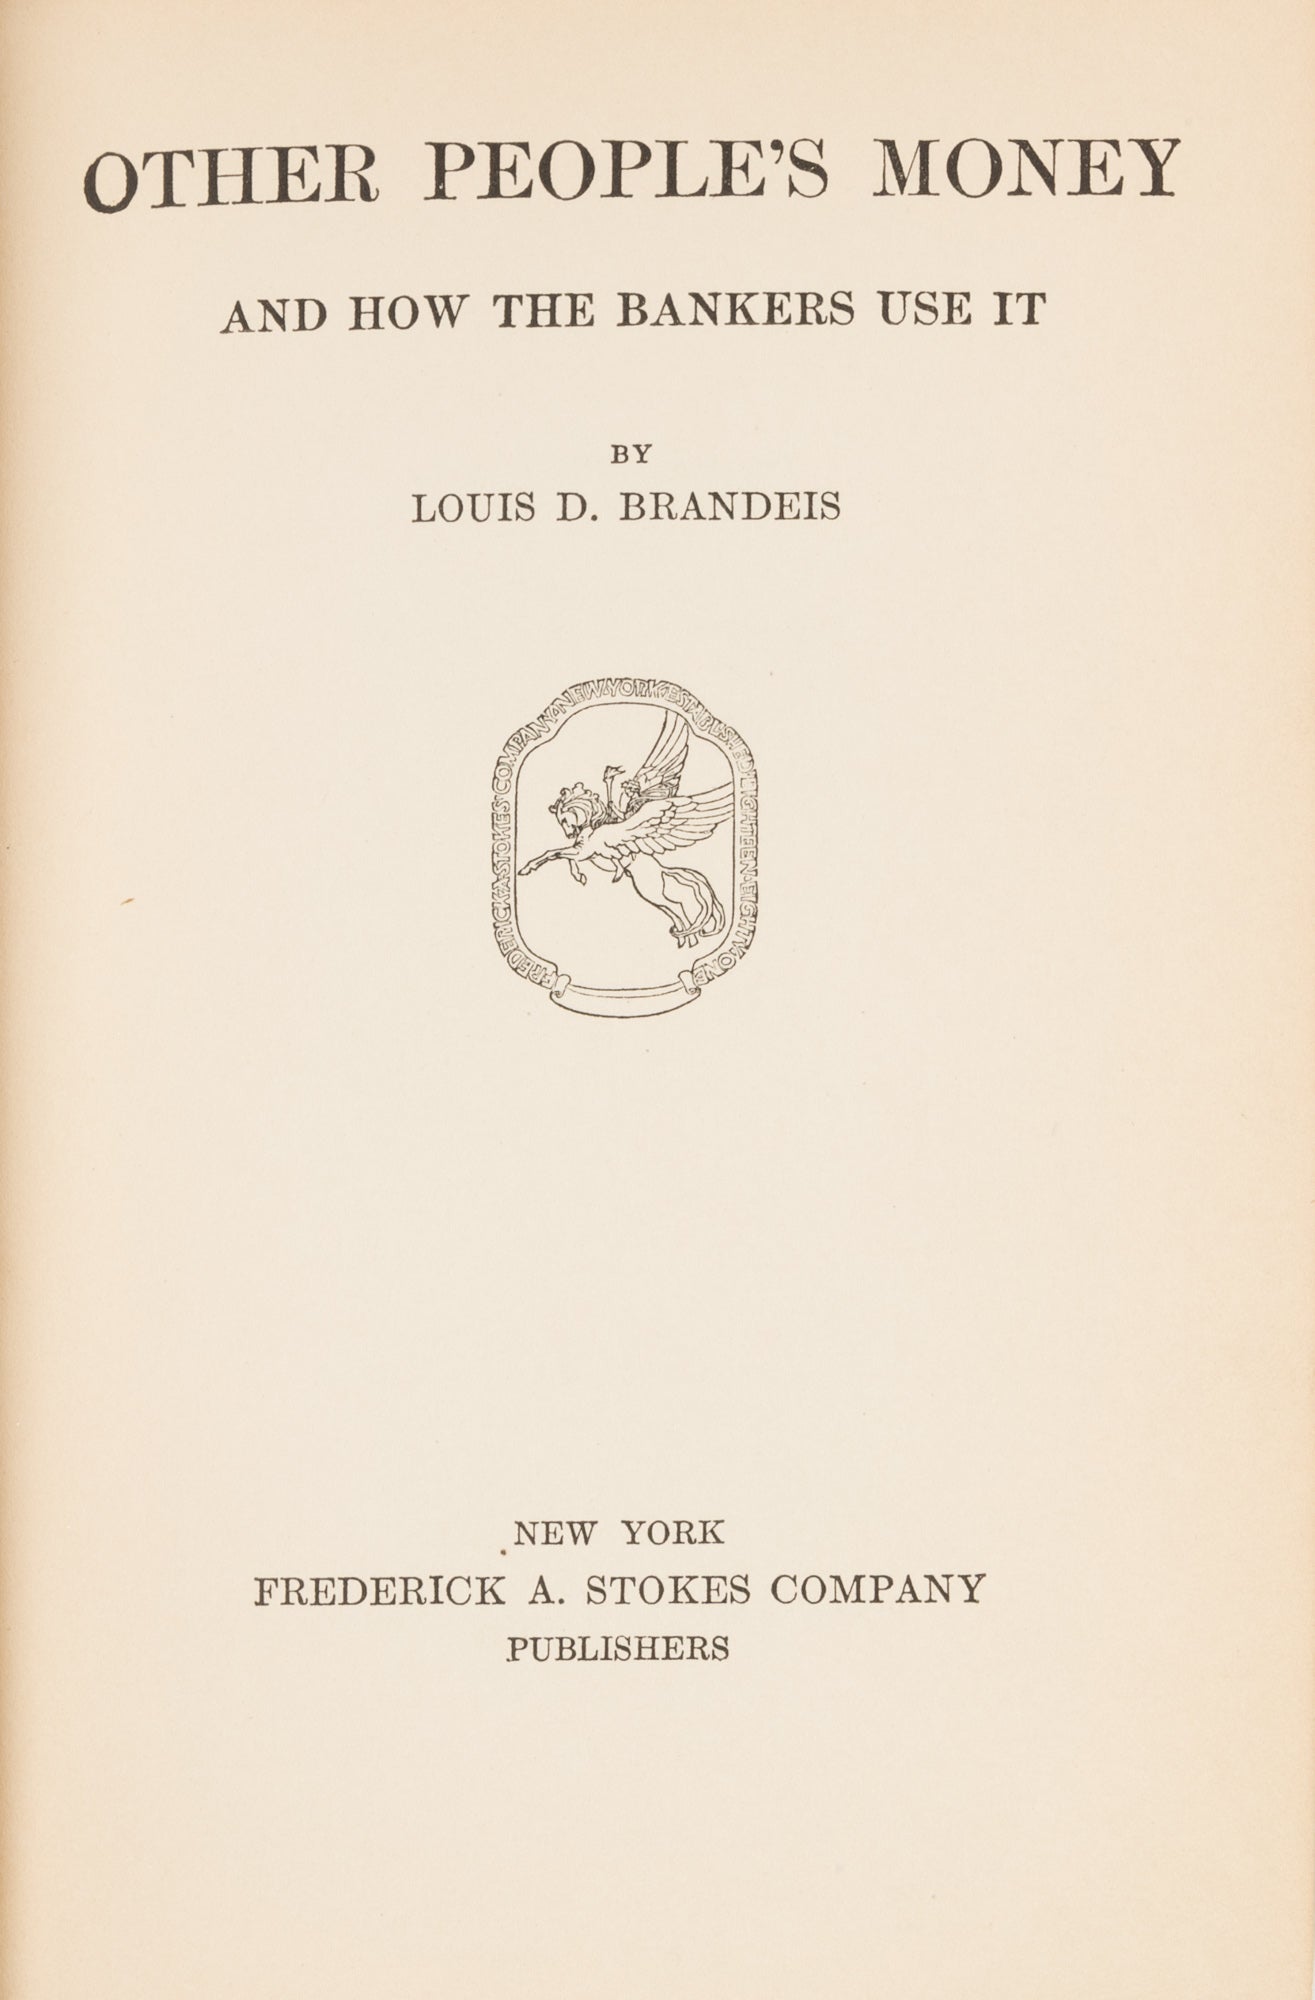 Other People's Money, and How Bankers Use It by Brandeis, Louis D - 1933